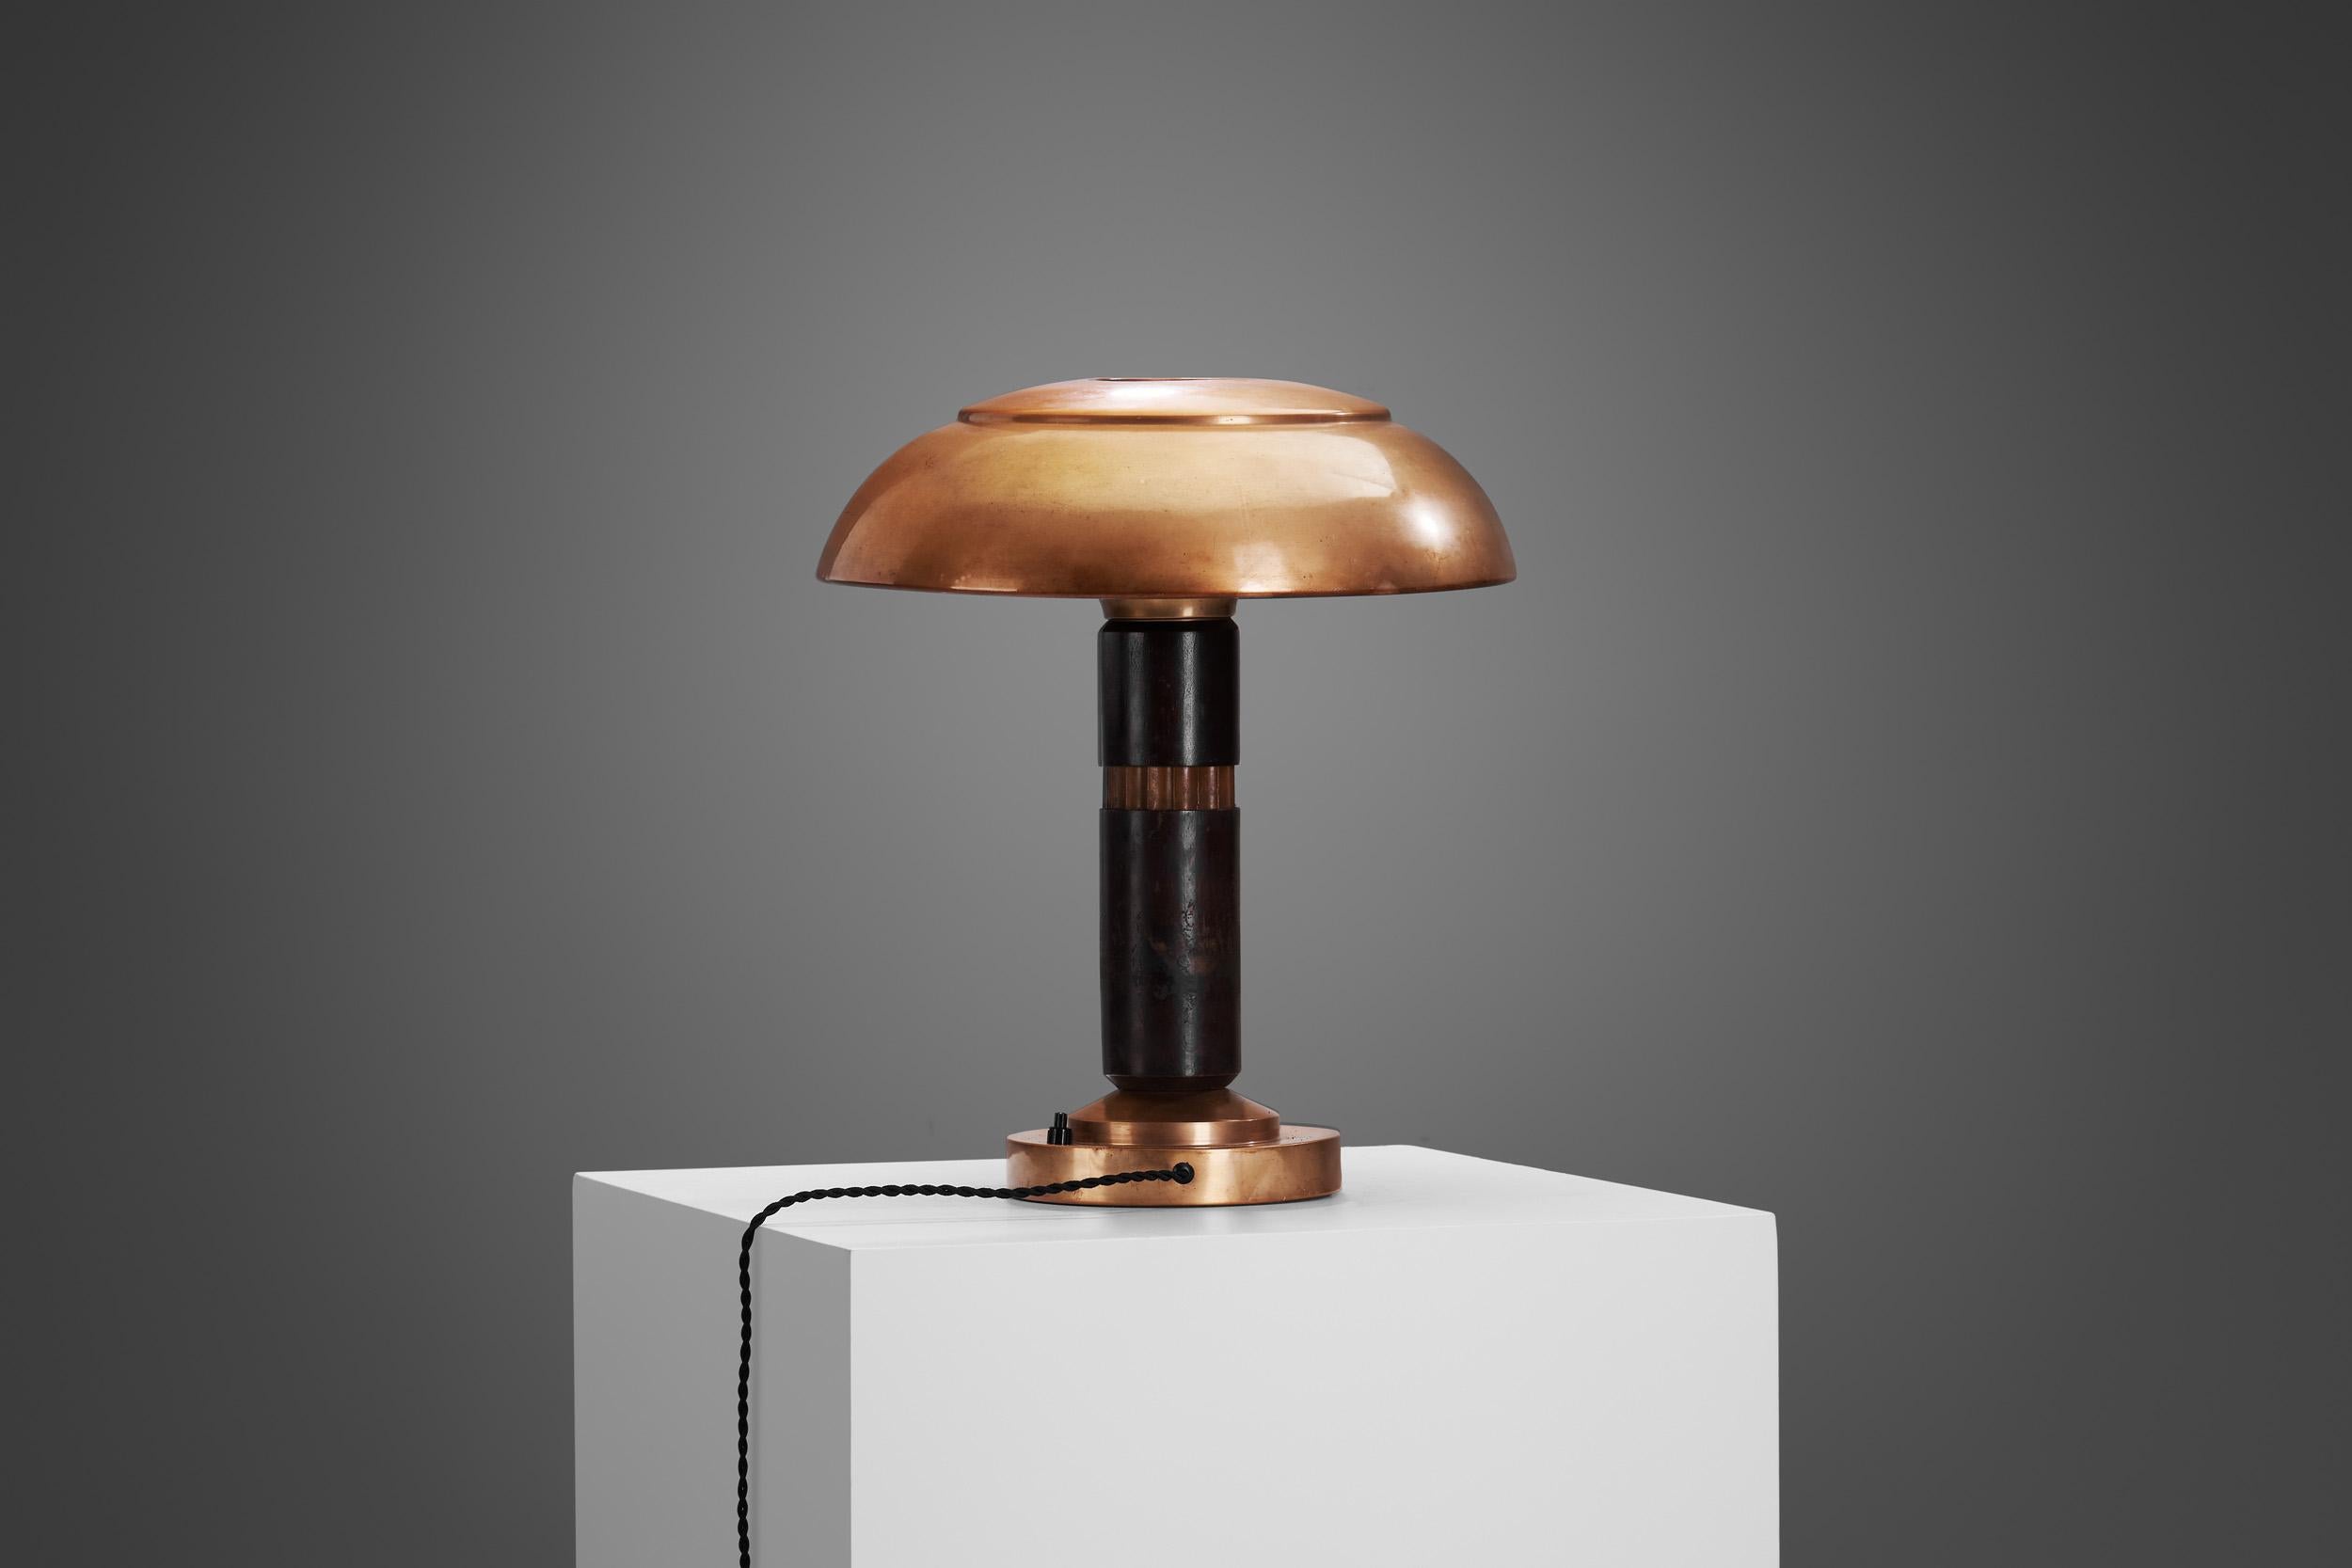 European Copper and Wood Art Deco Table Lamp, Europe ca 1930s For Sale